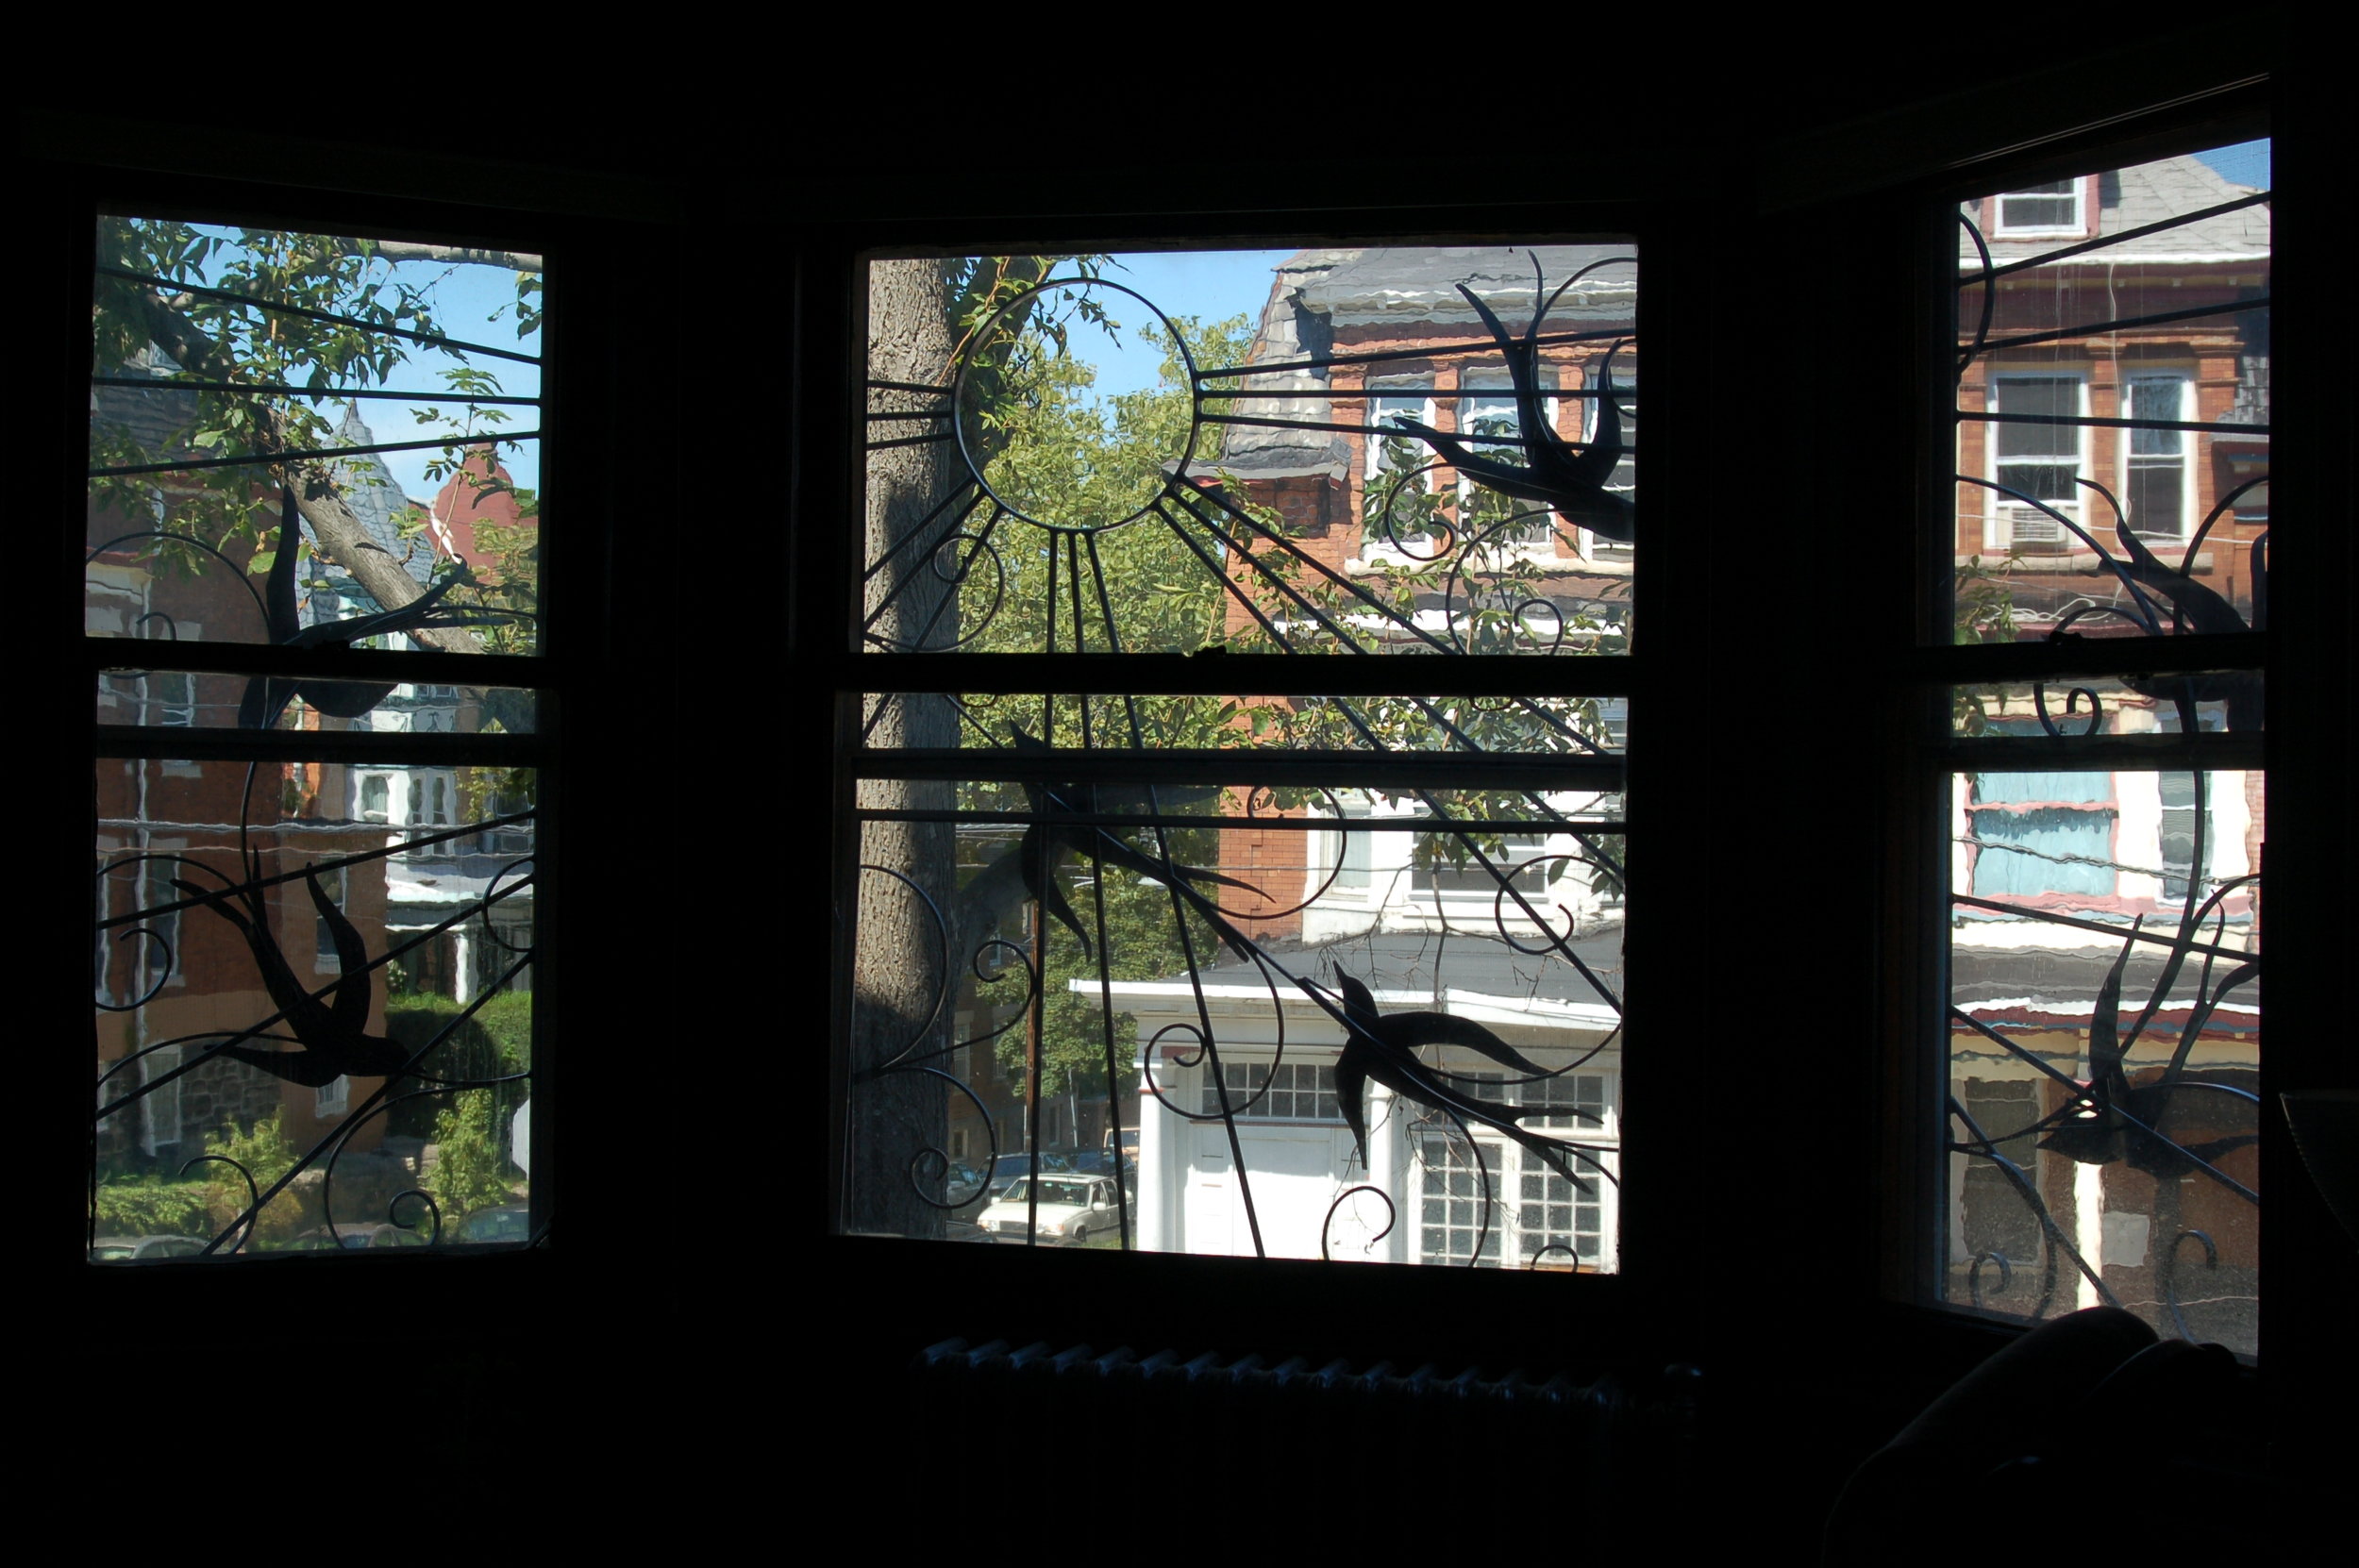 SWALLOWS WINDOW GRILL - private residence, Pine St. Philadelphia, PA